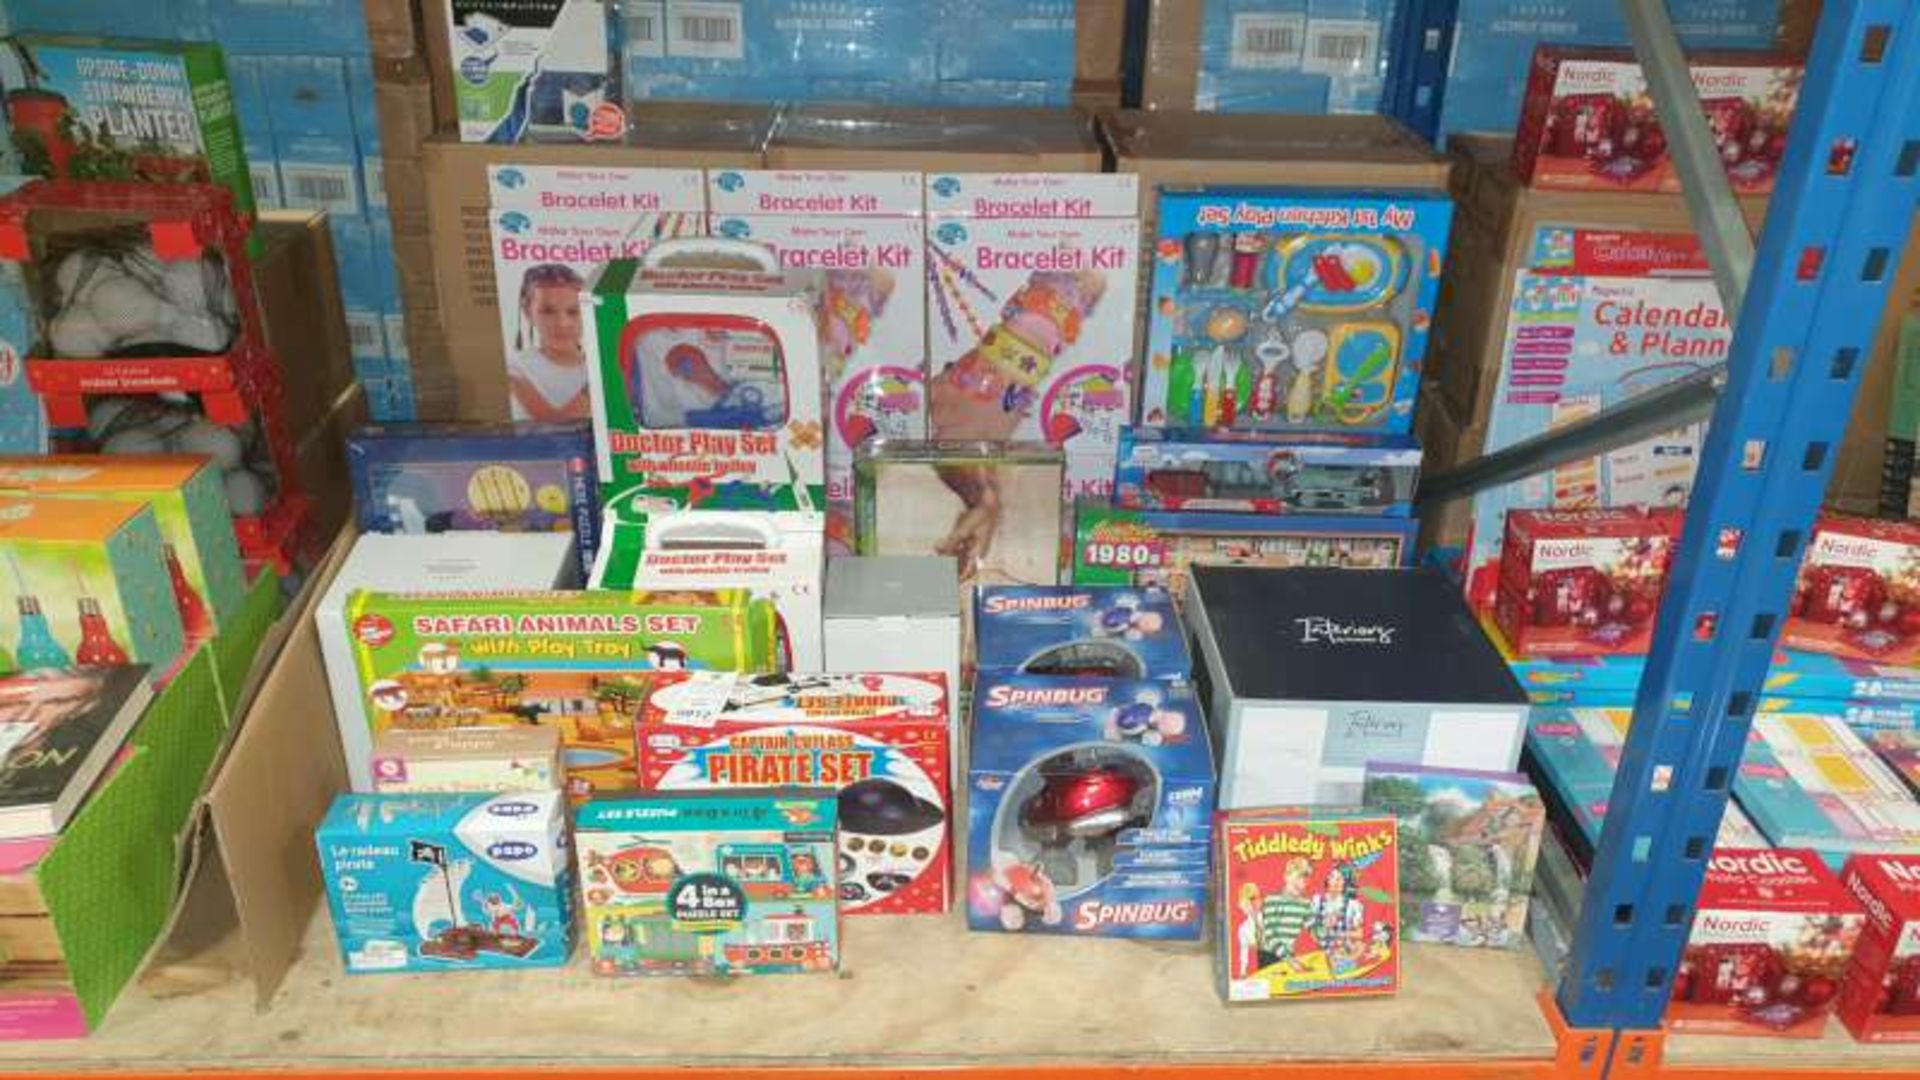 MIXED LOT CONTAINING DOCTOR PLAY SETS, SPIN BUGS, PIRATE PLAY SETS, THOMAS AND THE TANK ENGINE, ETC